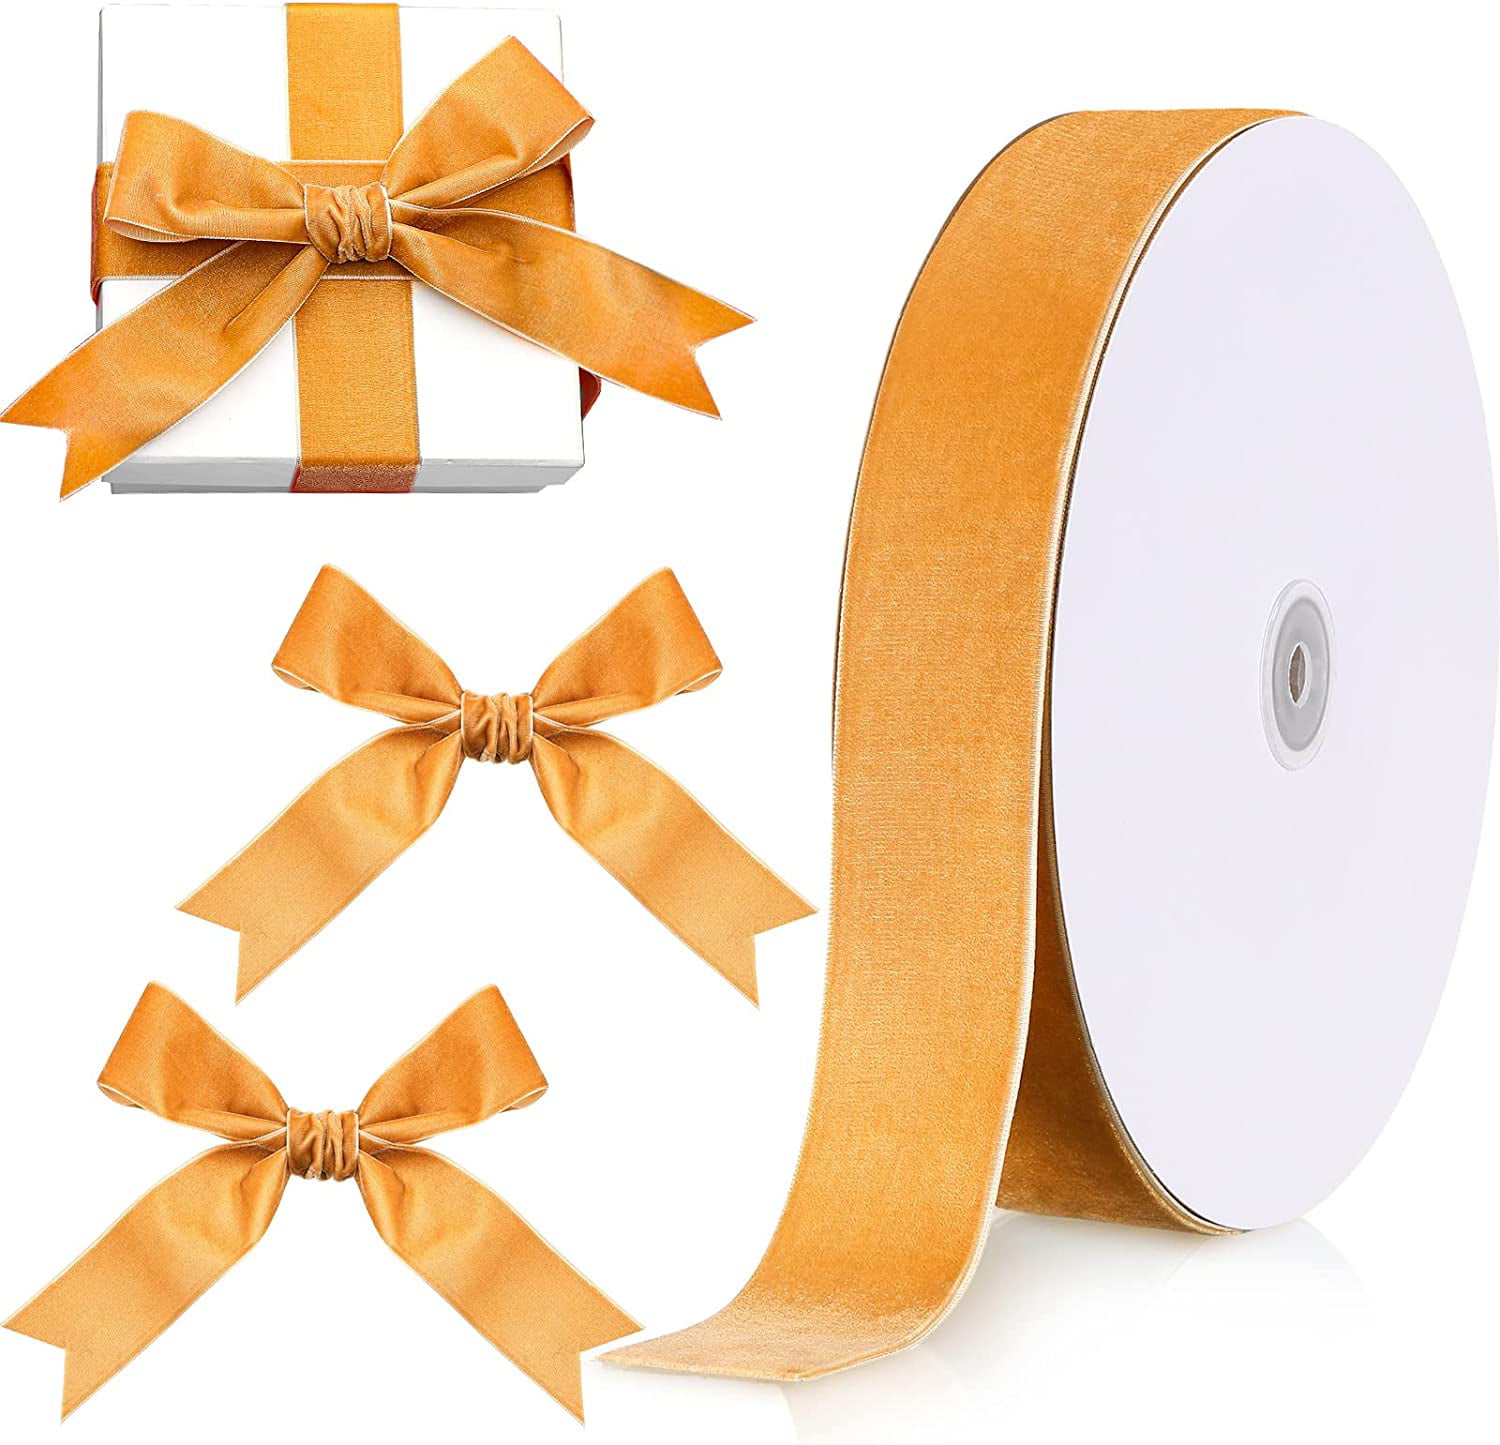 Christmas Ribbon 3 Rolls 1 inch Double Face Satin Ribbons for Gift Wrapping, Wre